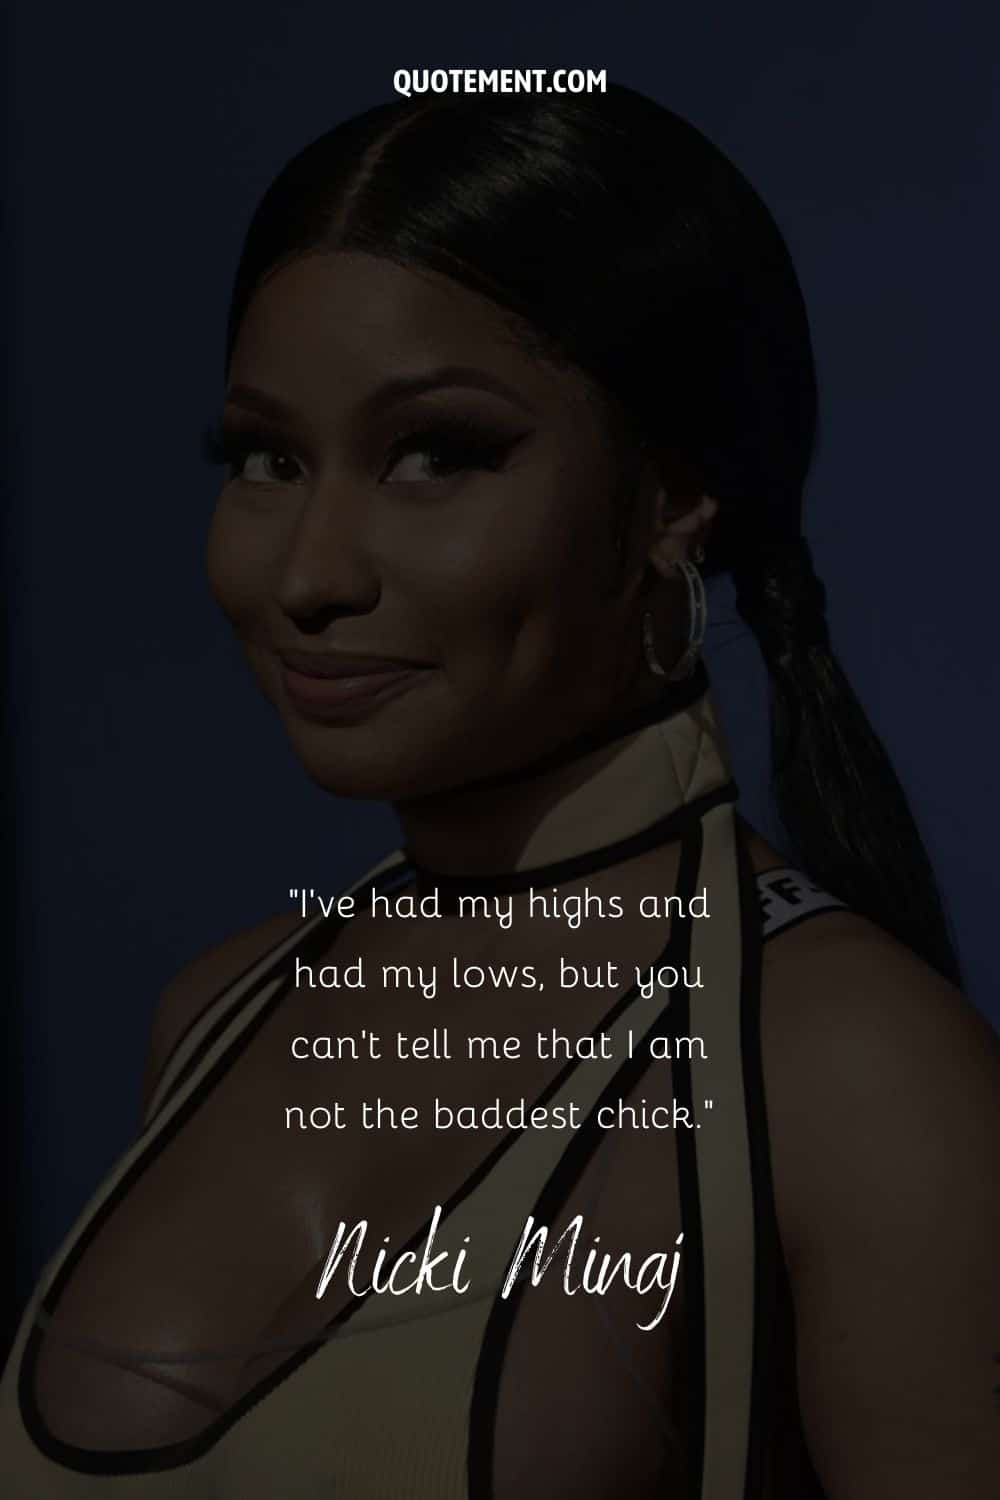 Funny quote by Nicki Minaj and her portrait in the background